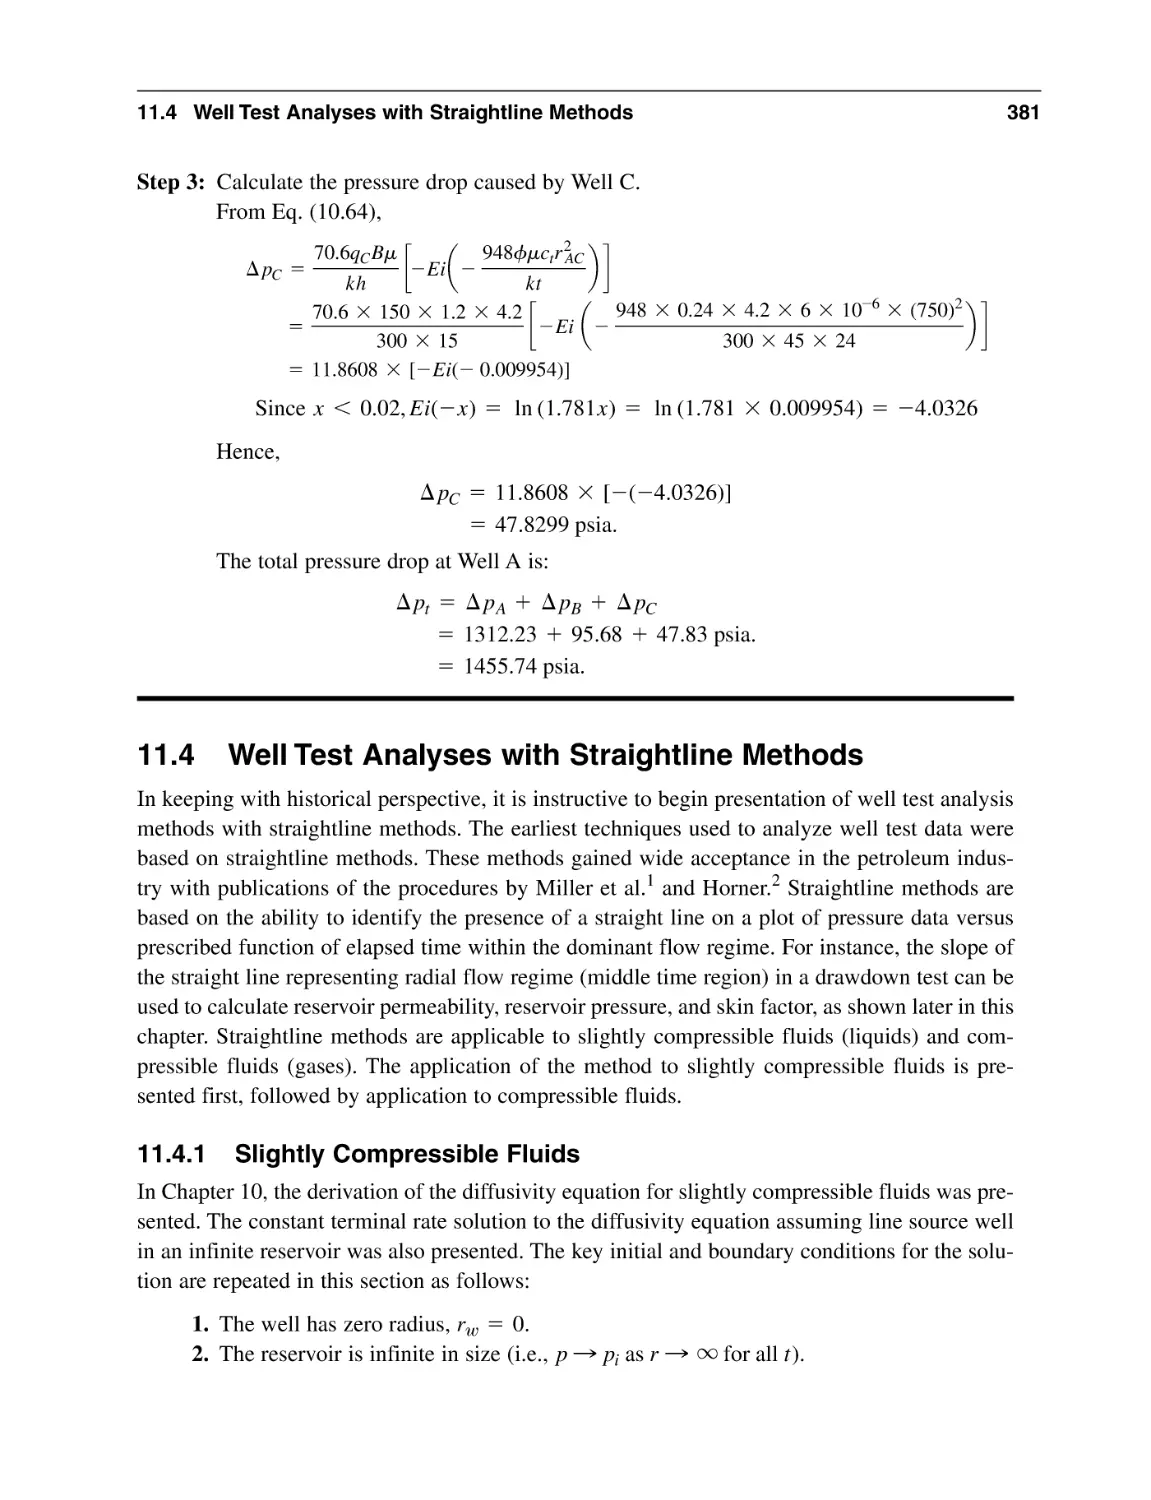 11.4 Well Test Analyses with Straightline Methods
11.4.1 Slightly Compressible Fluids